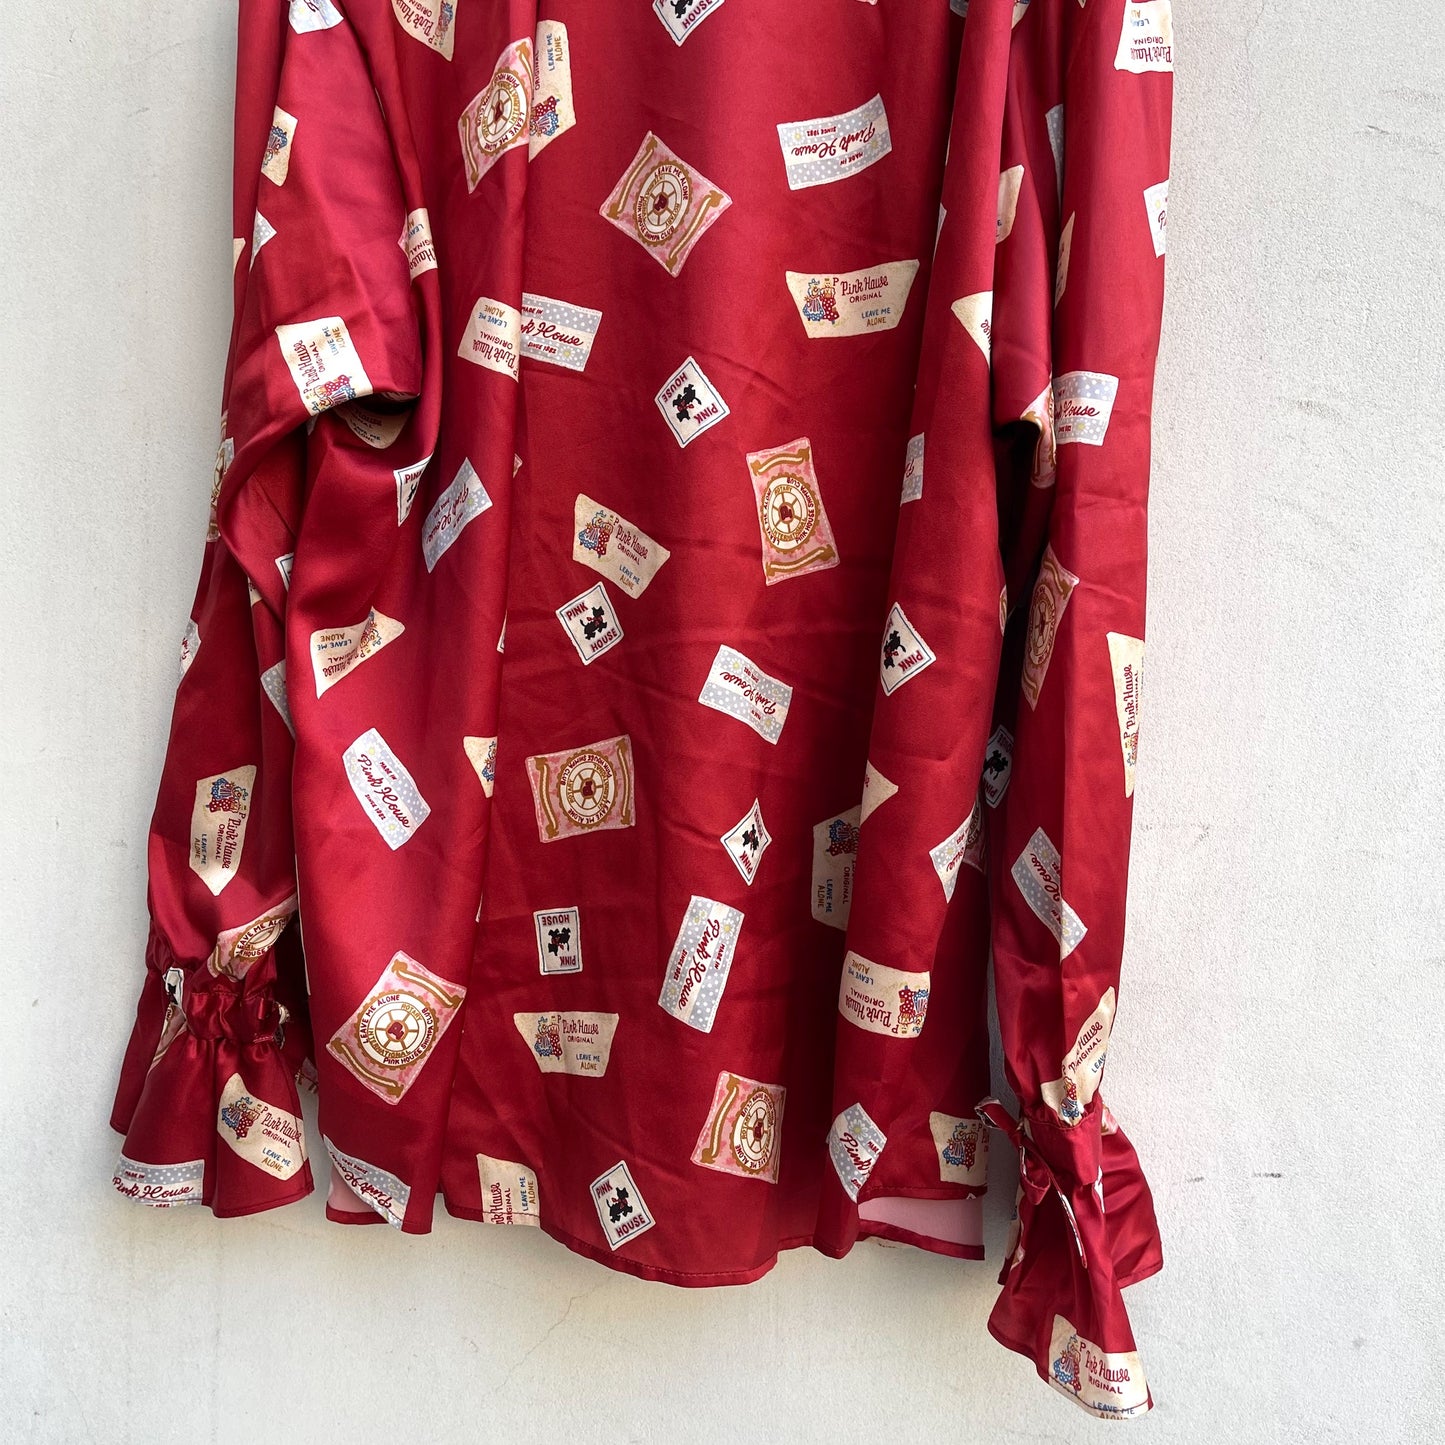 【MIKIOSAKABE×PINK HOUSE】blouse / red / レッドフリルブラウス